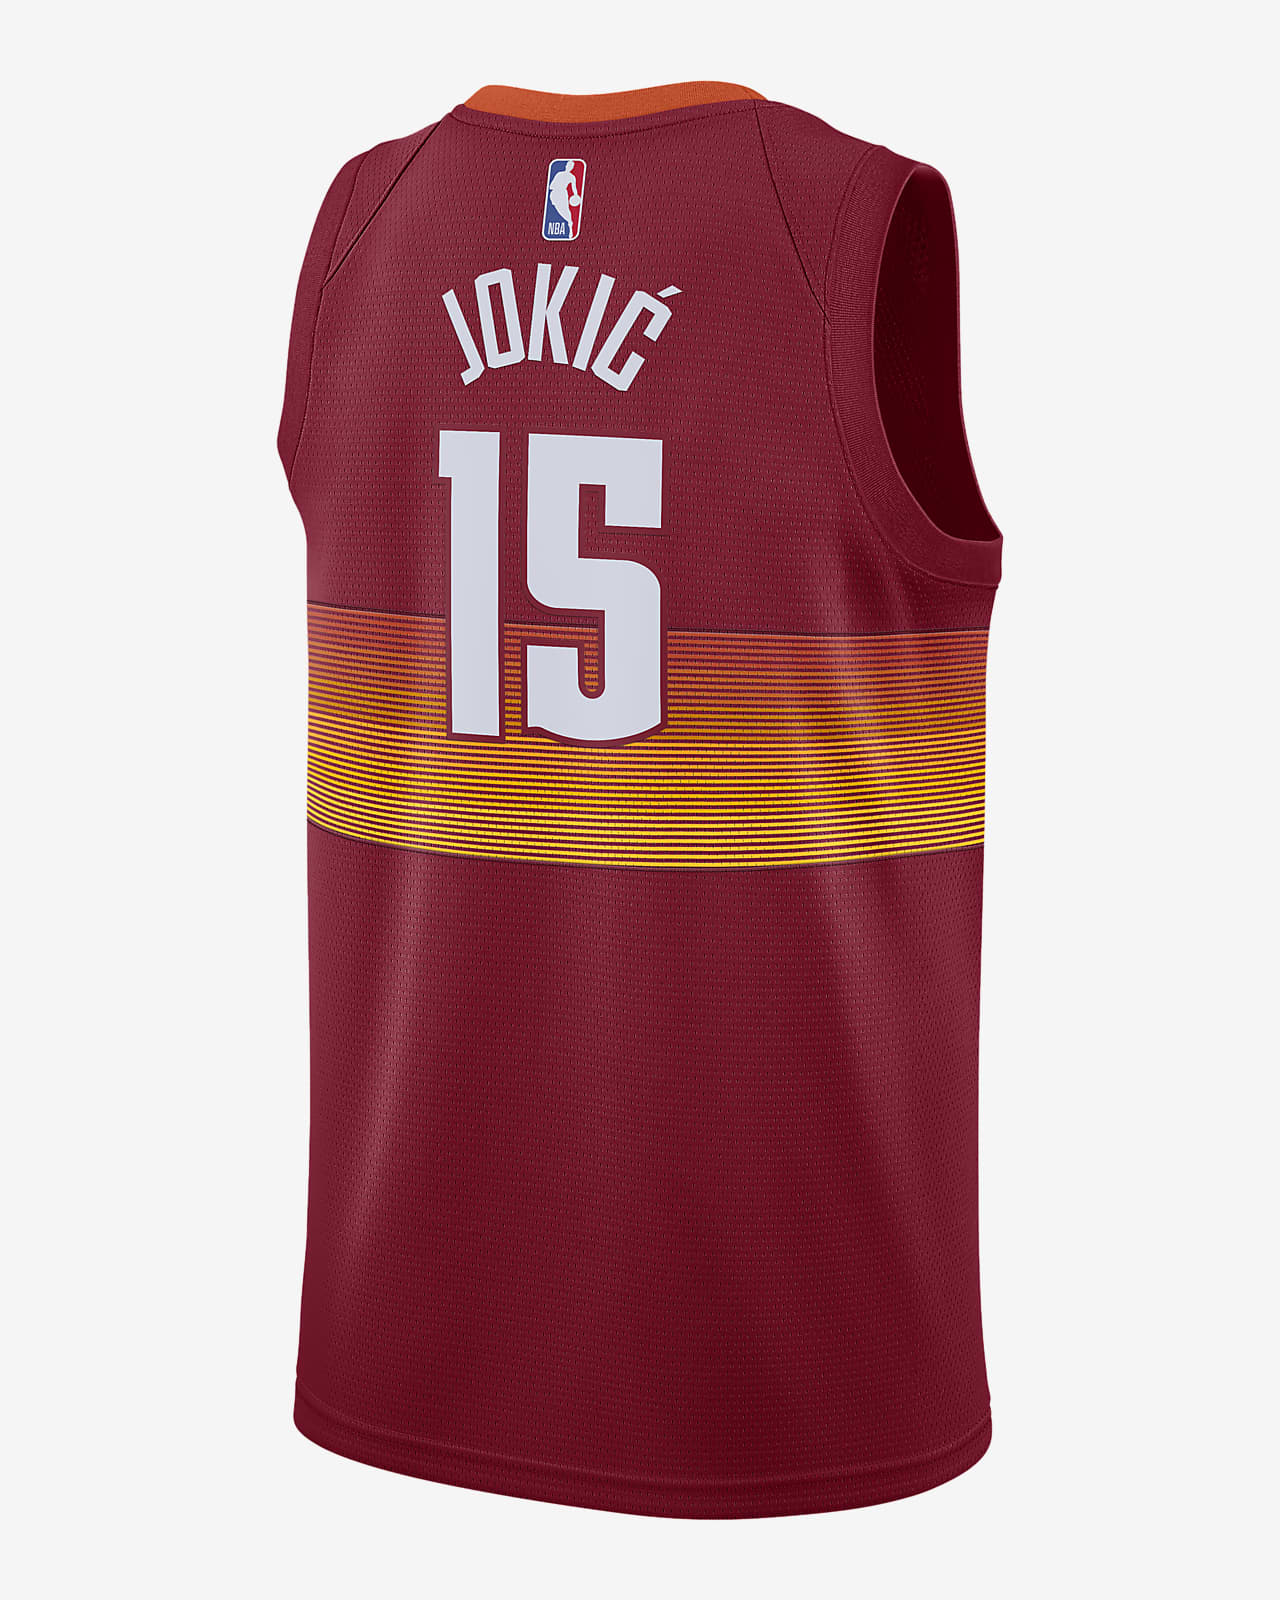 nuggets city edition jersey